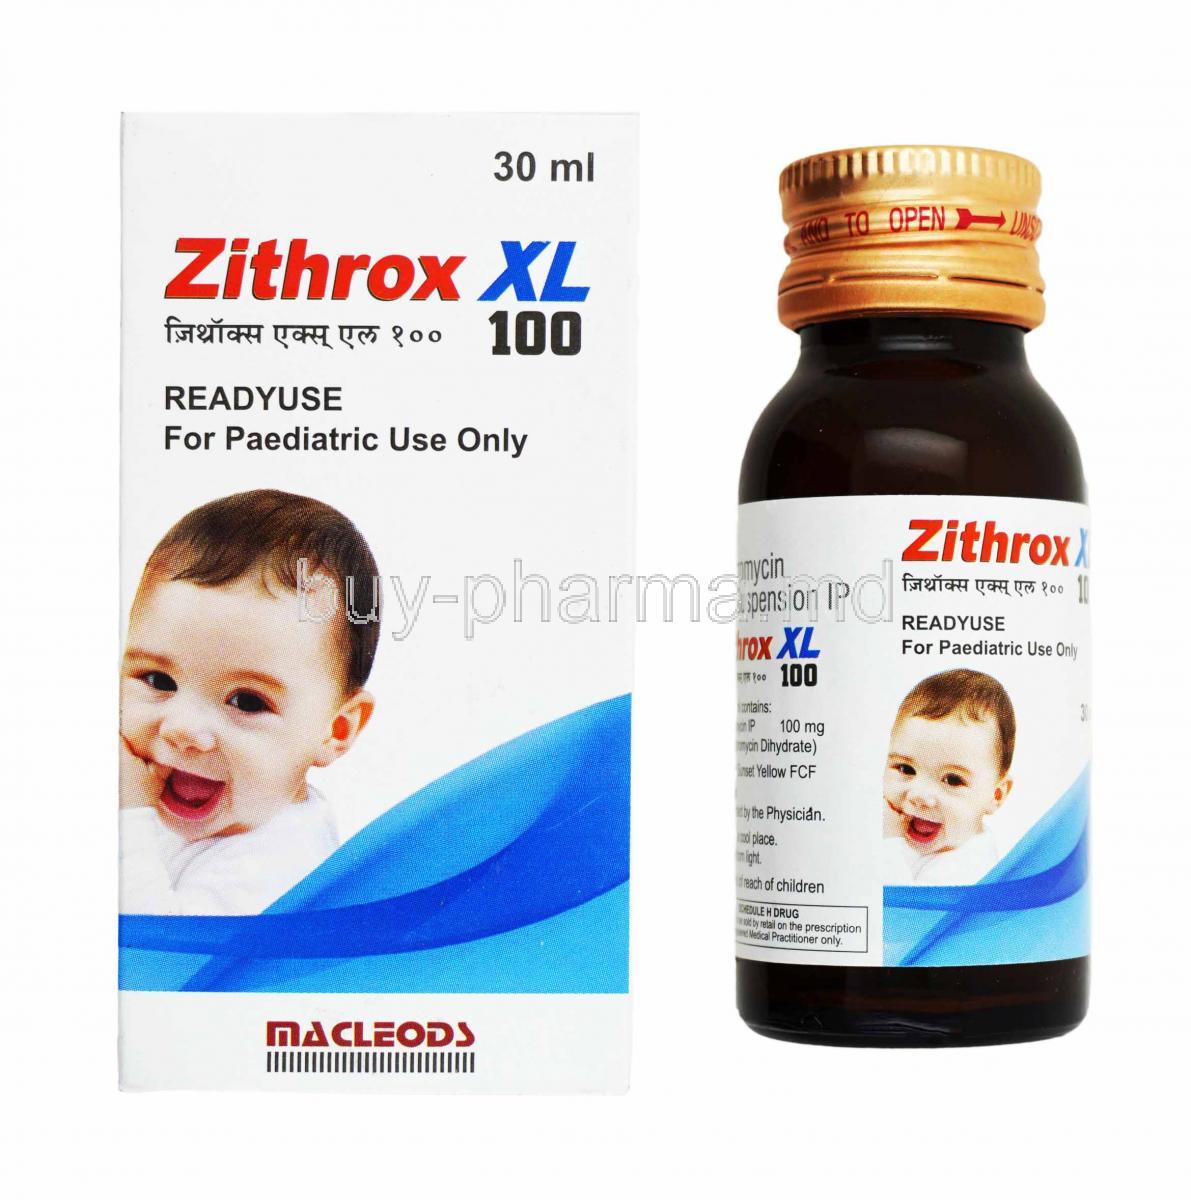 Zithrox XL Oral Suspensionicon, Azithromycin 100mg box and bottle